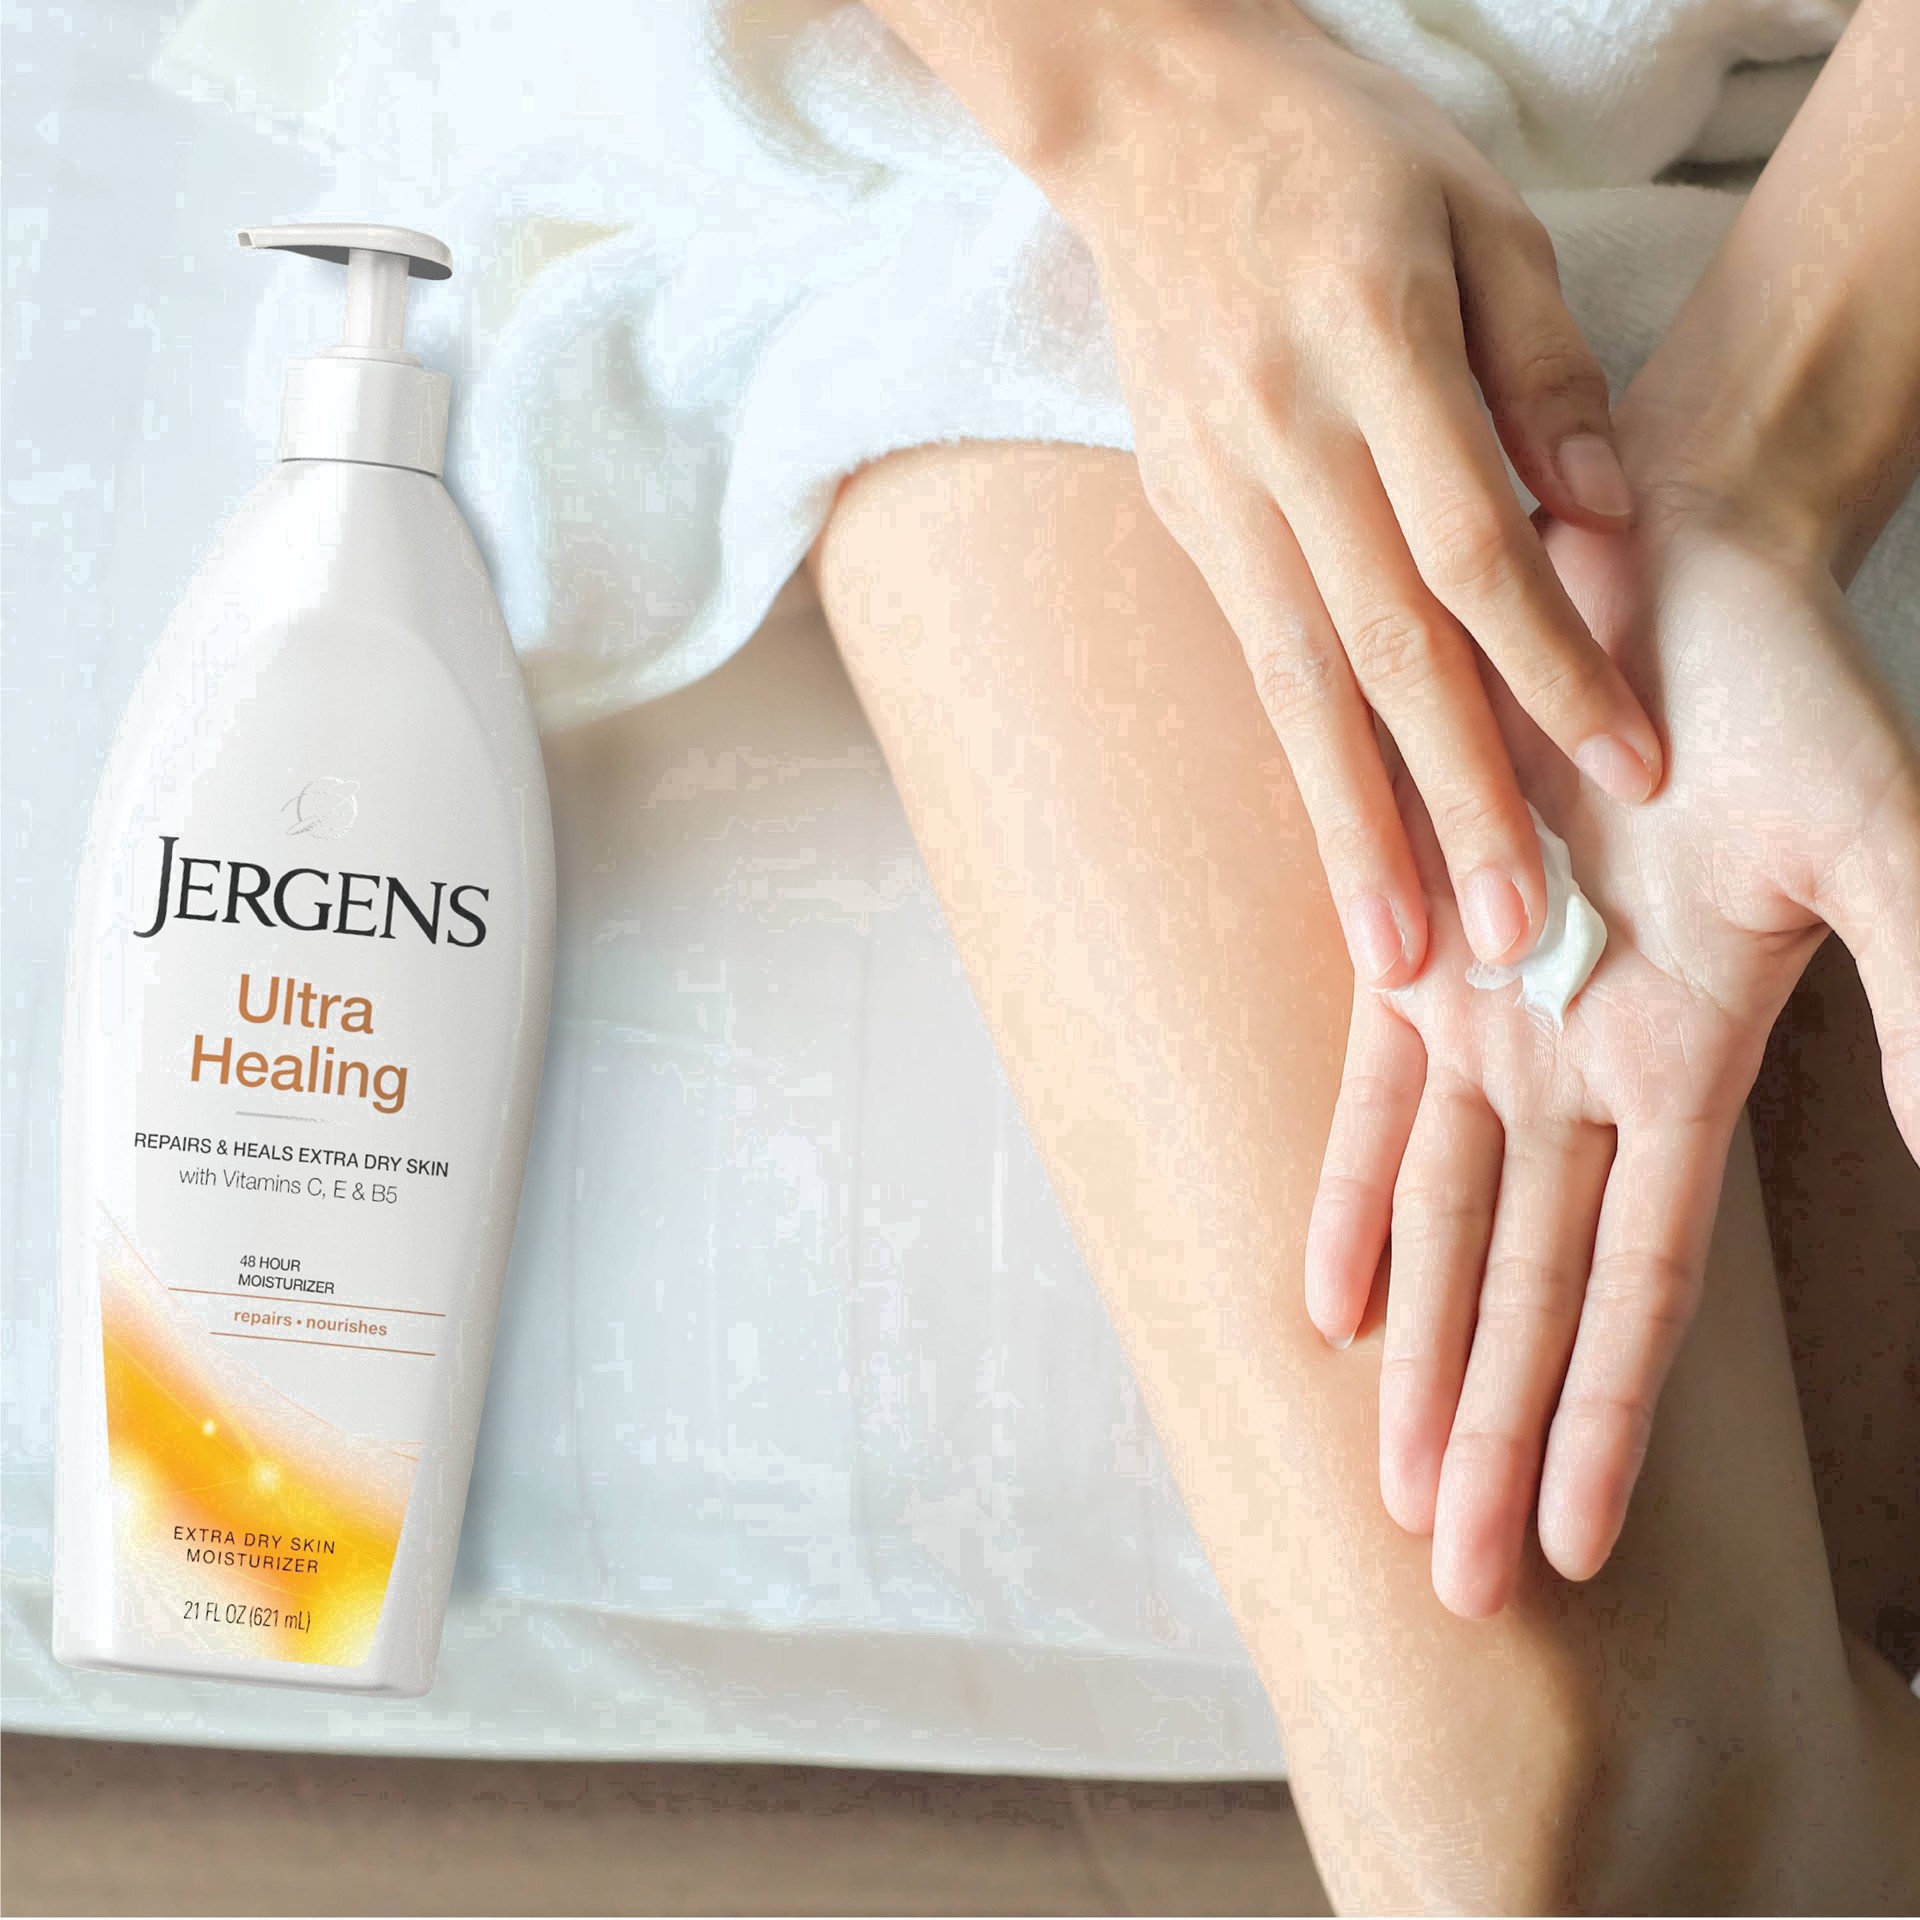 slide 8 of 67, Jergens Ultra Healing Dry Skin Moisturizer, Body and Hand Lotion, for Absorption into Extra Dry Skin, 21 Oz, 21 fl oz